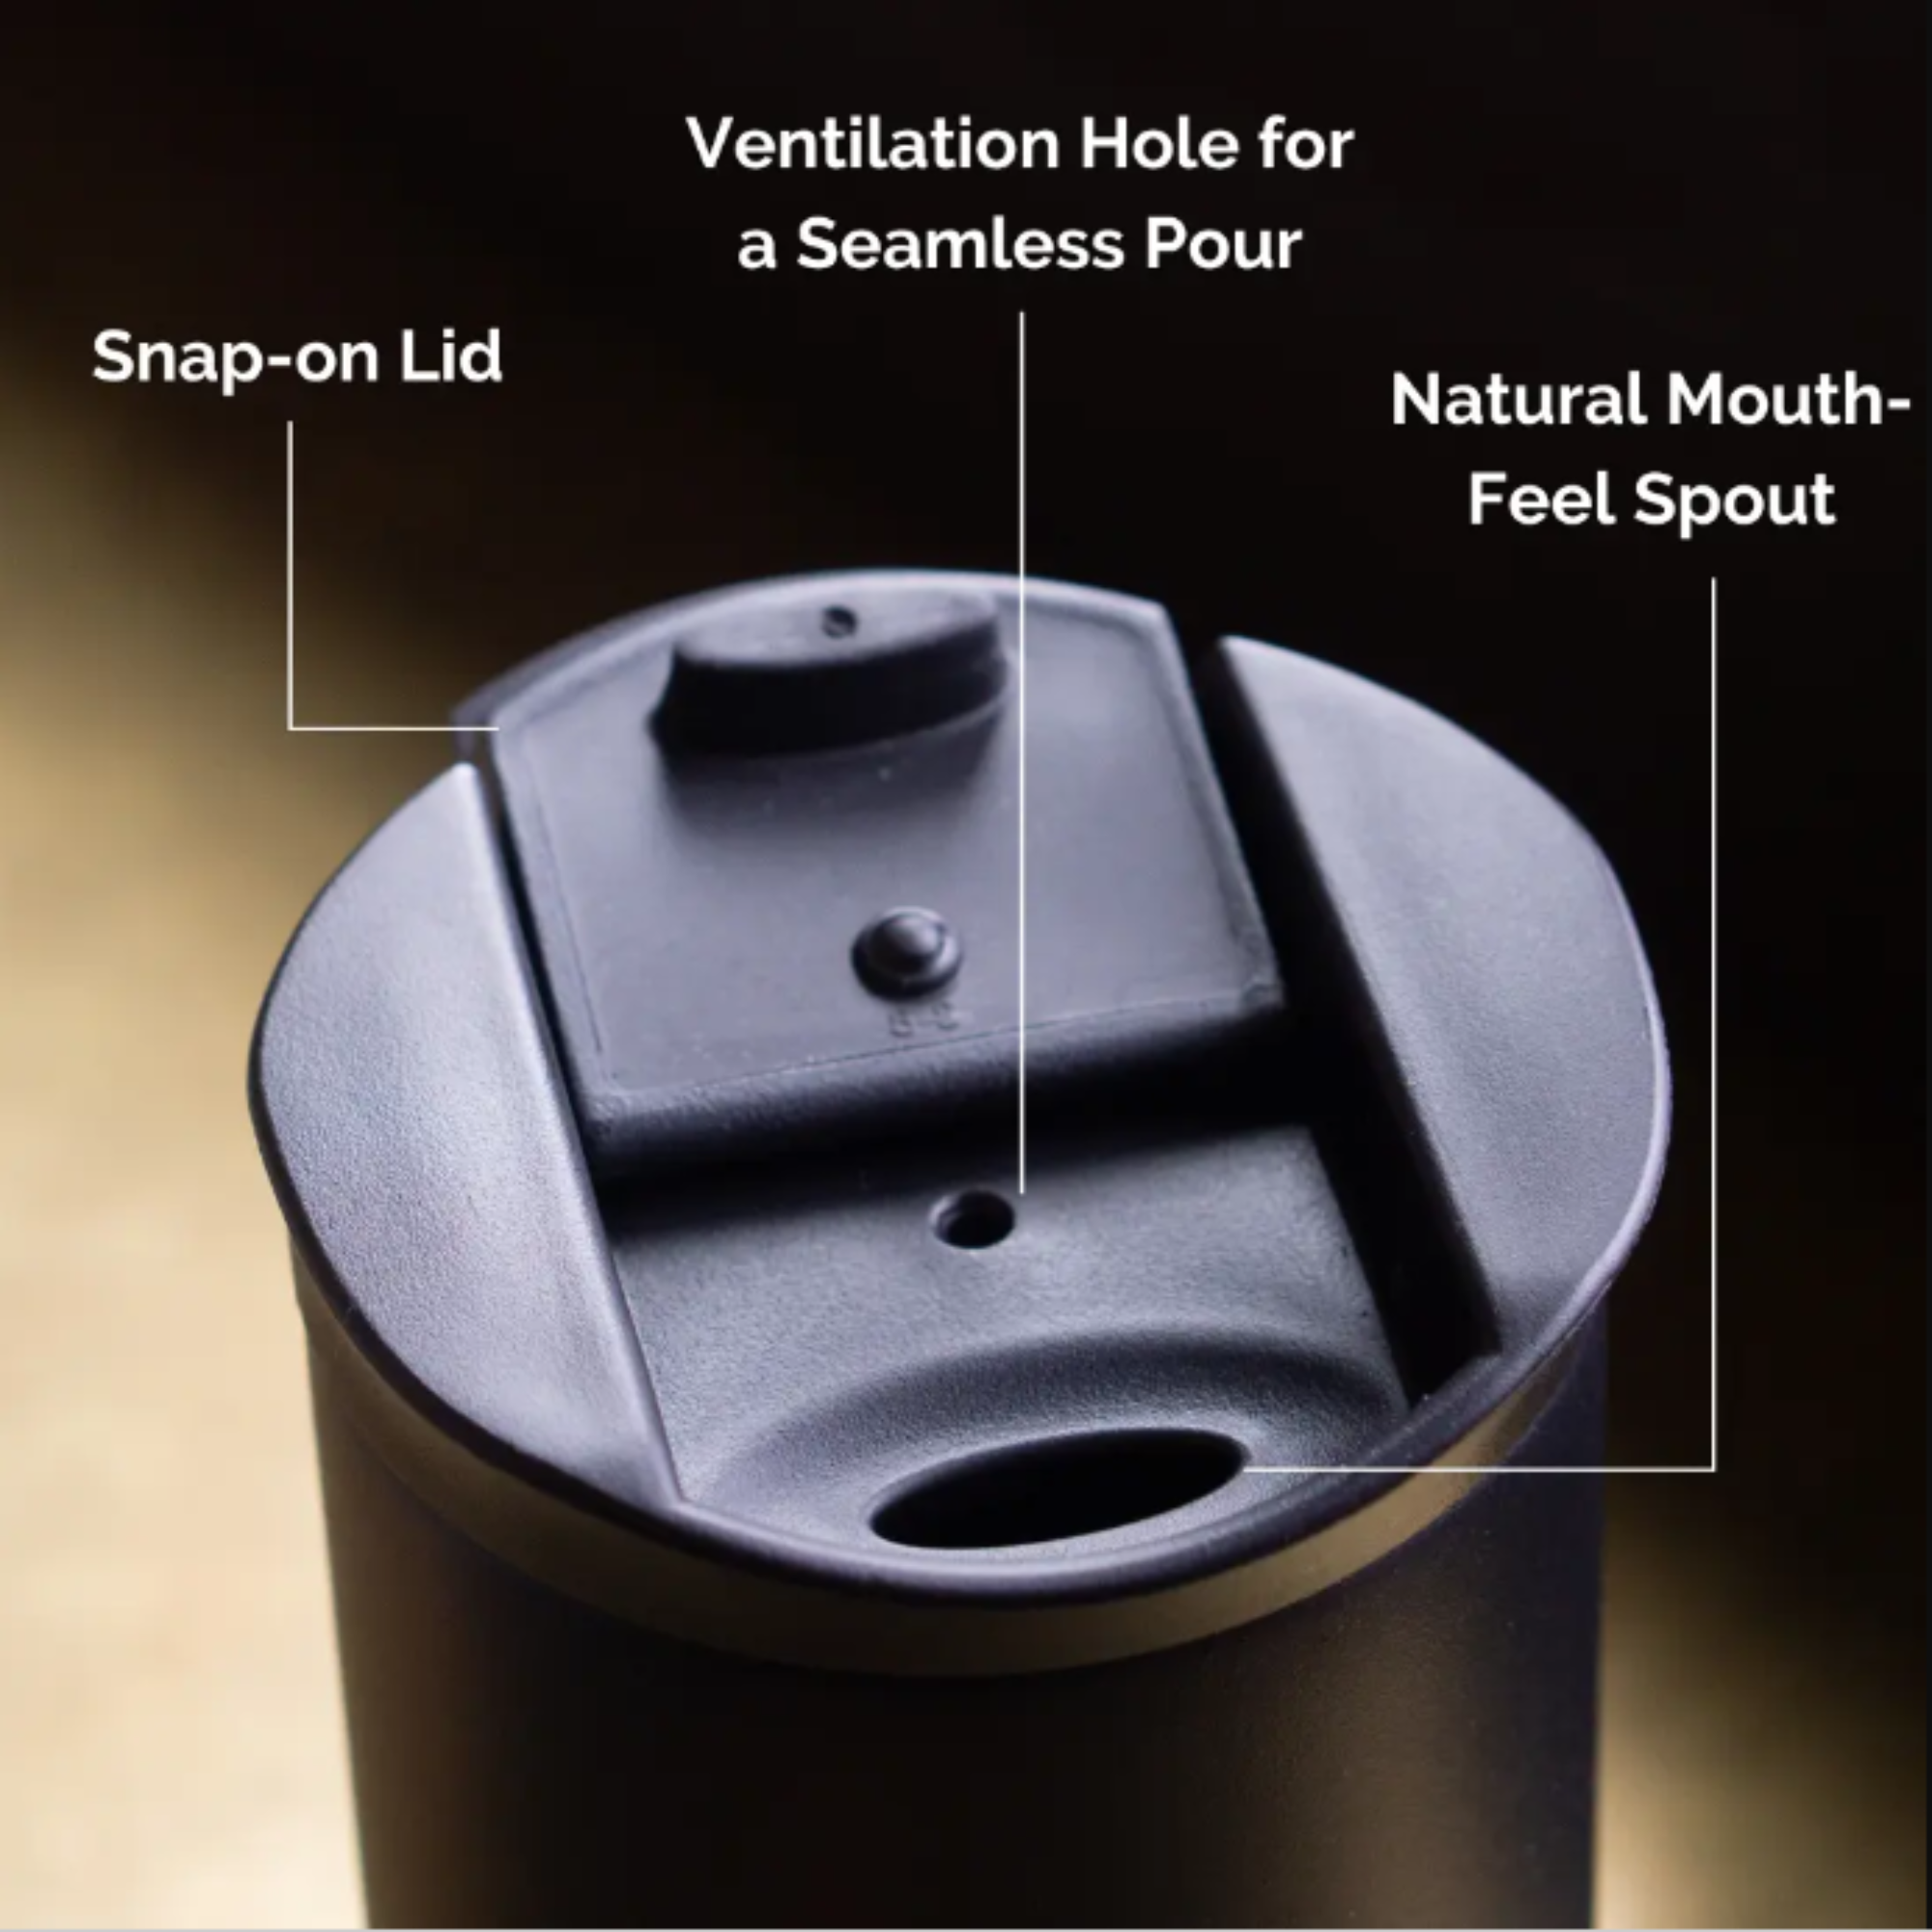 travel mug lid showing snap-on lid, ventilation hole for a seamless pour, and a natural mouth-feel spout